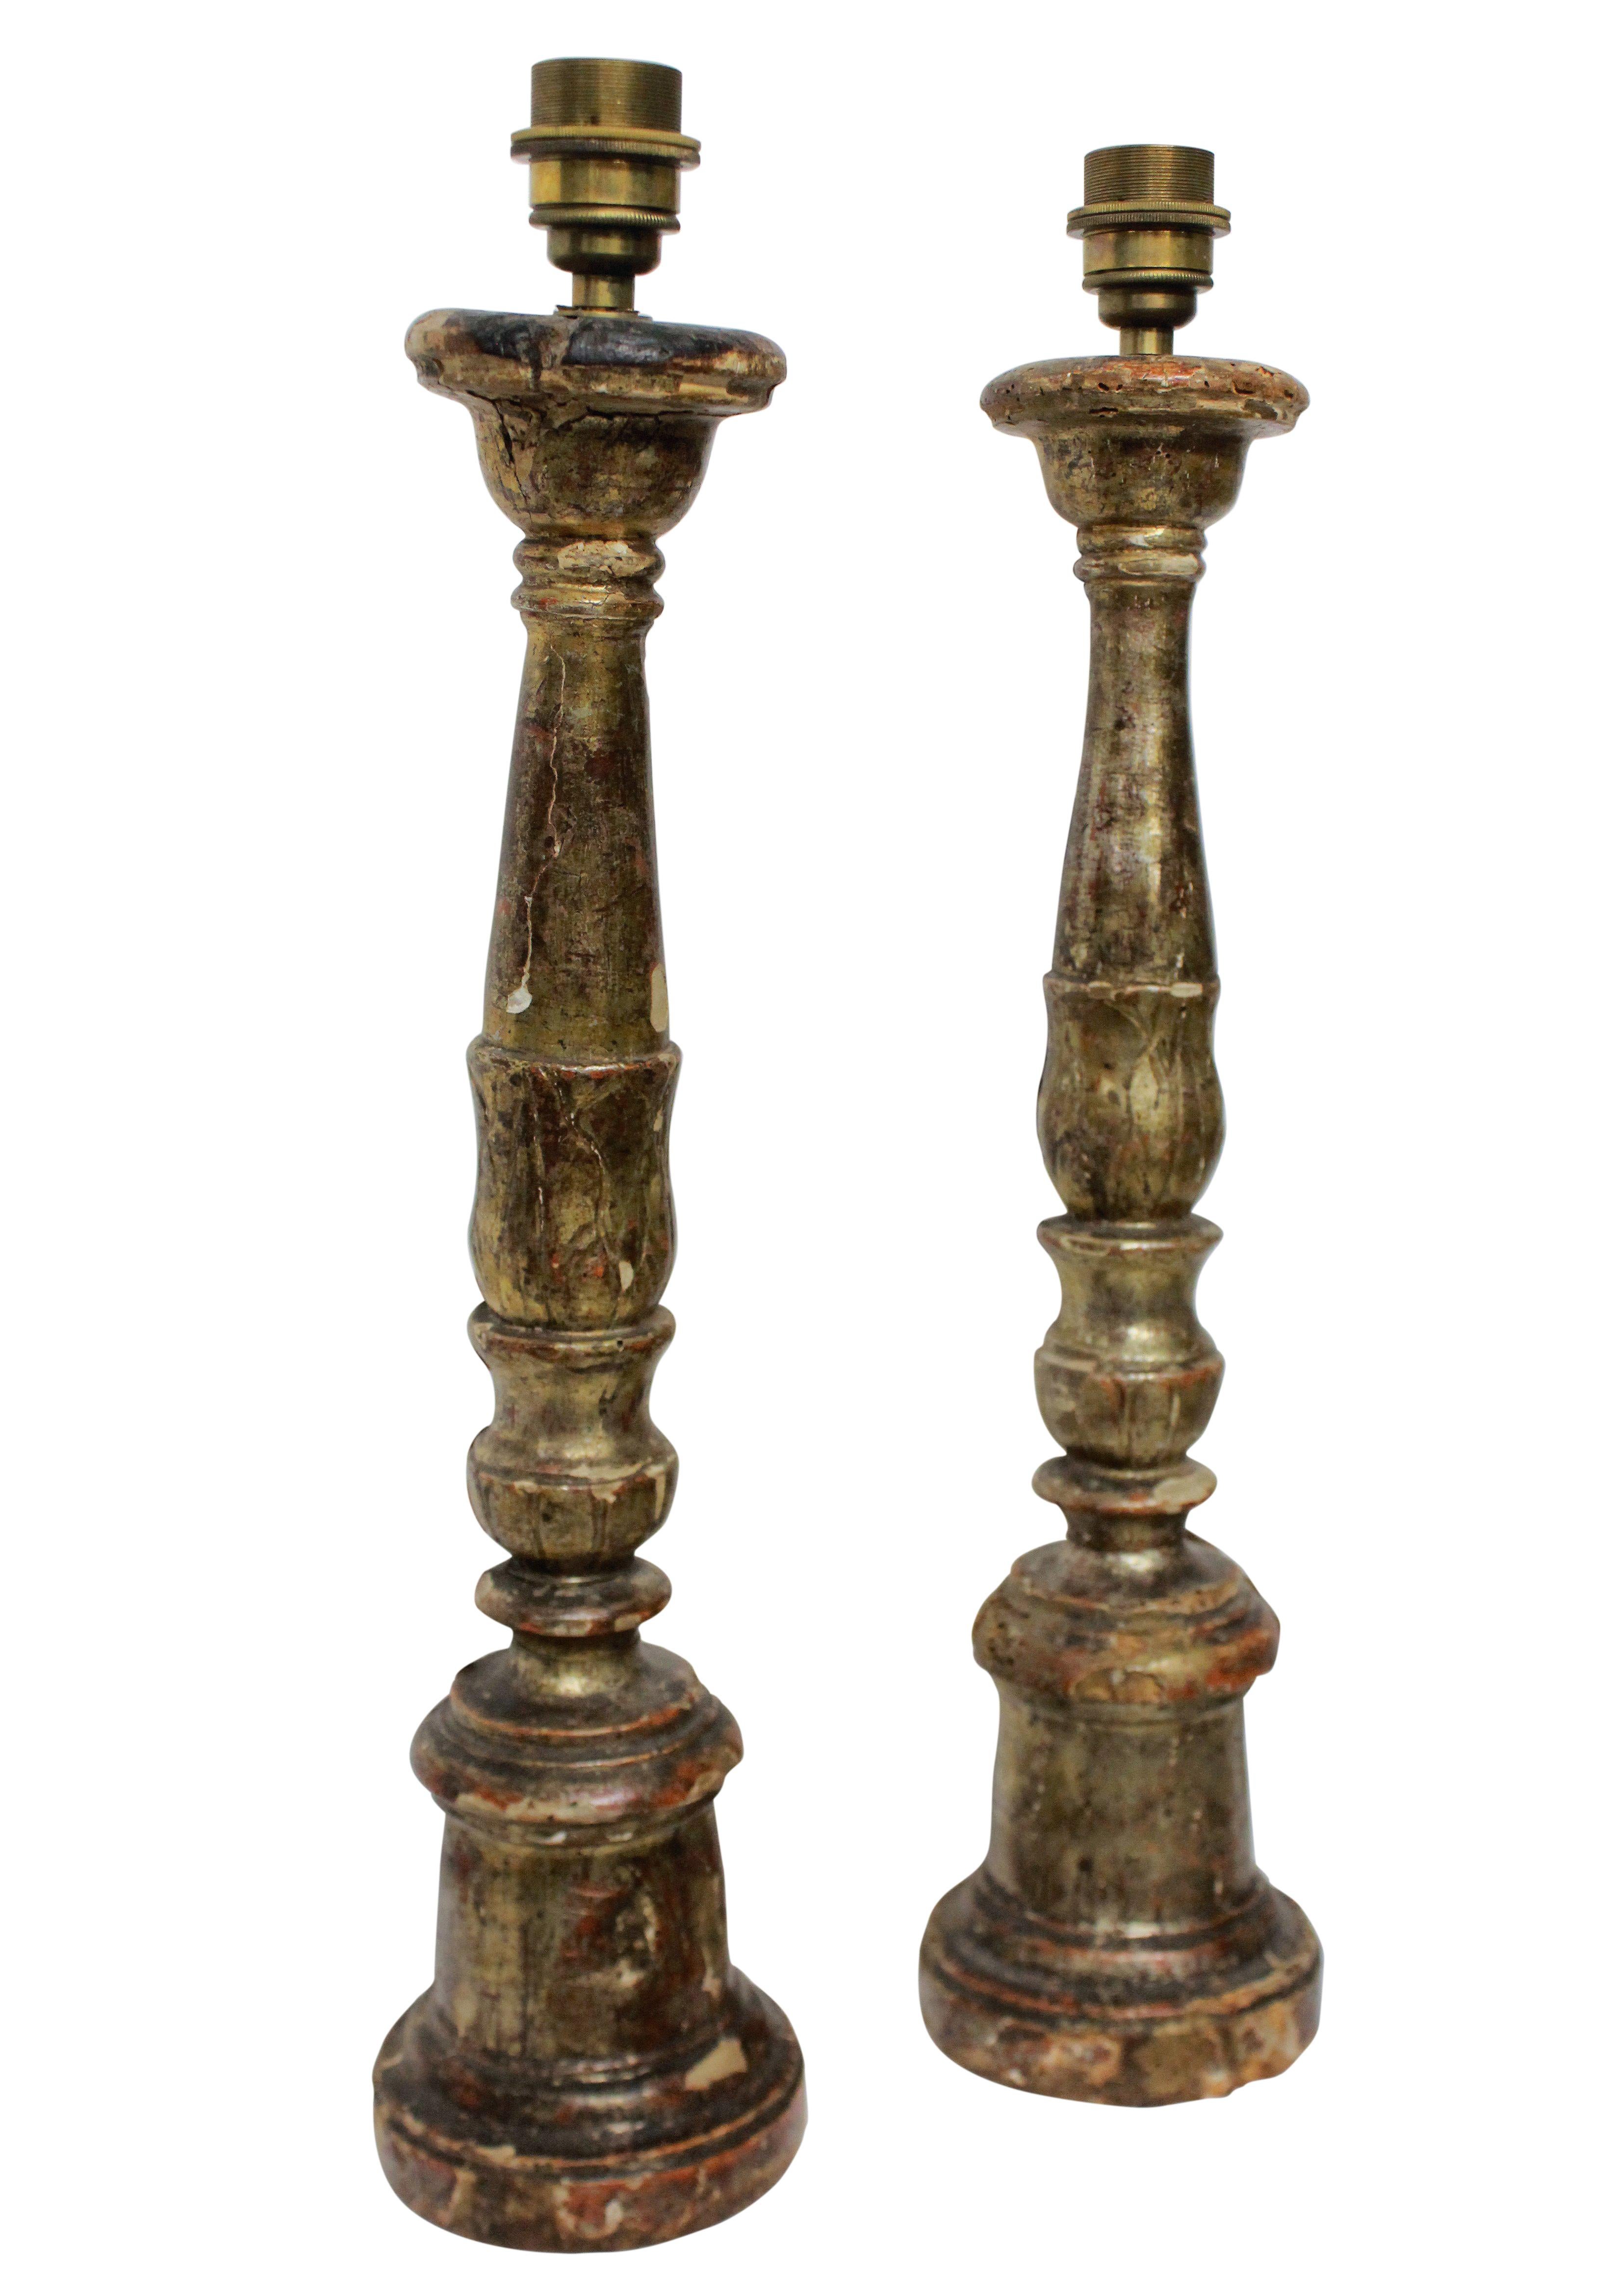 A pair of Italian 18th century silver leaf candlesticks as lamps.